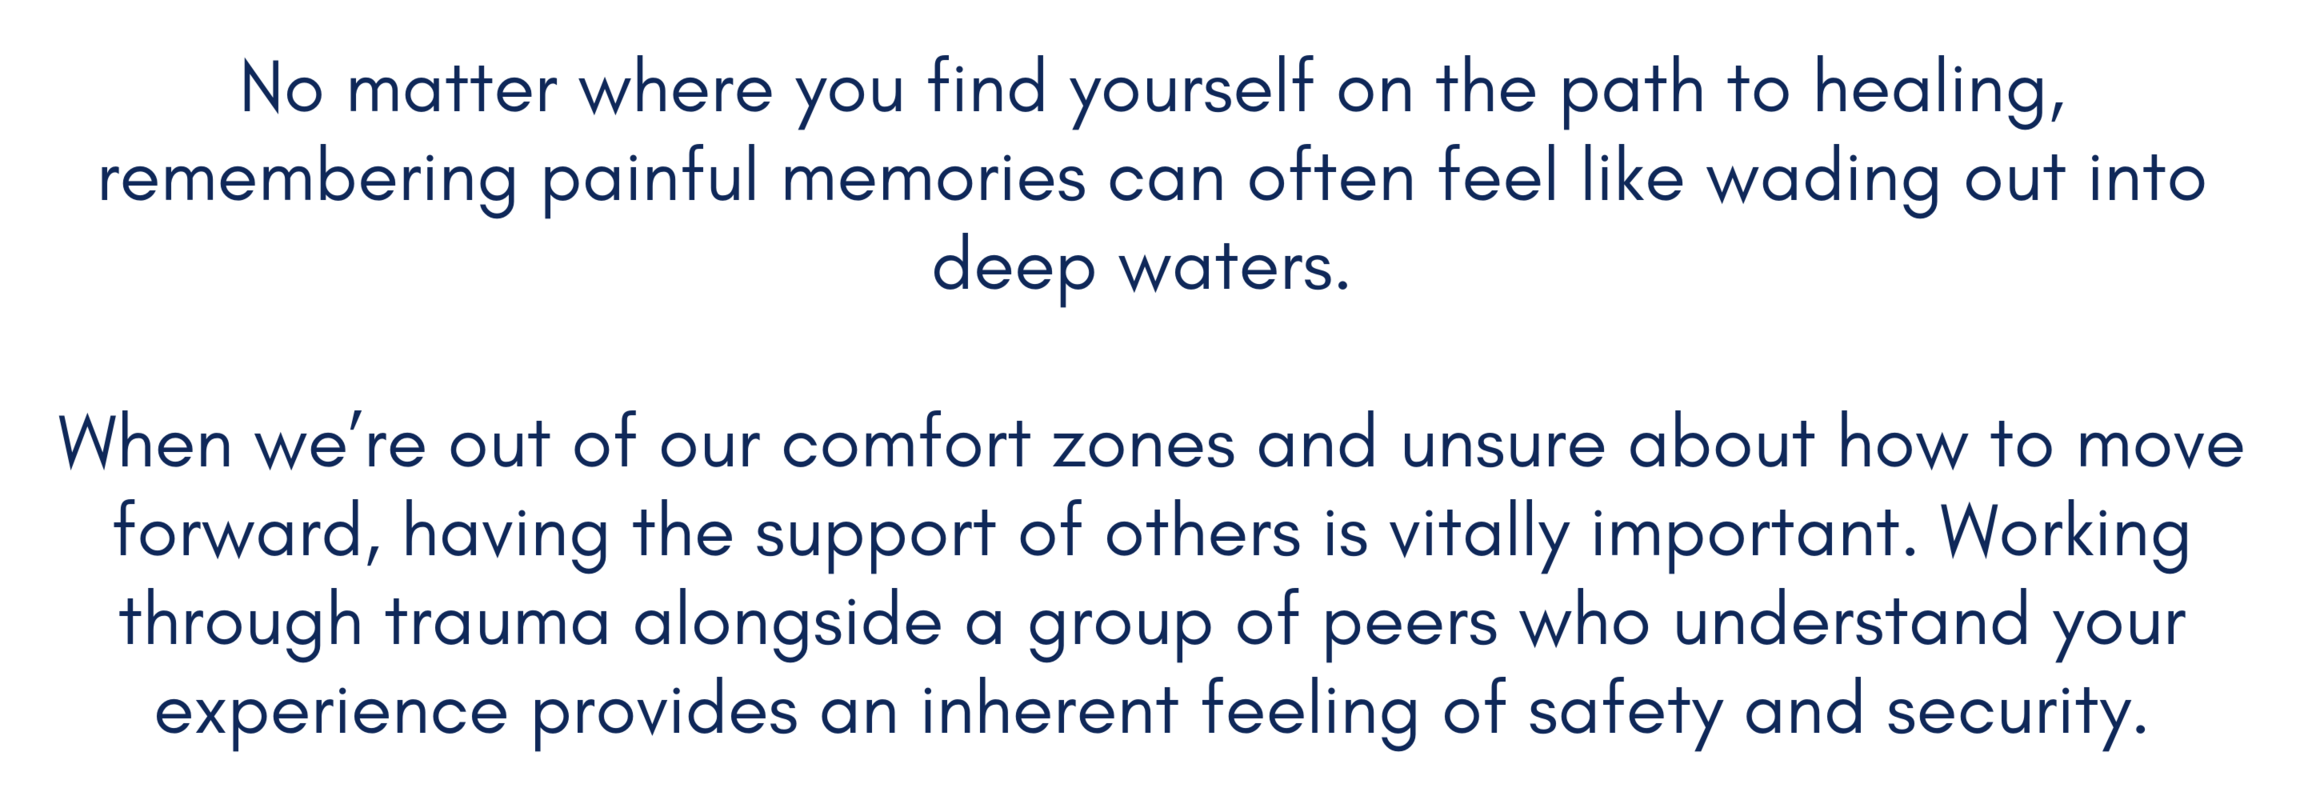 No matter where you find yourself on the path to healing, remembering painful memories can often feel like wading out into deep waters. 